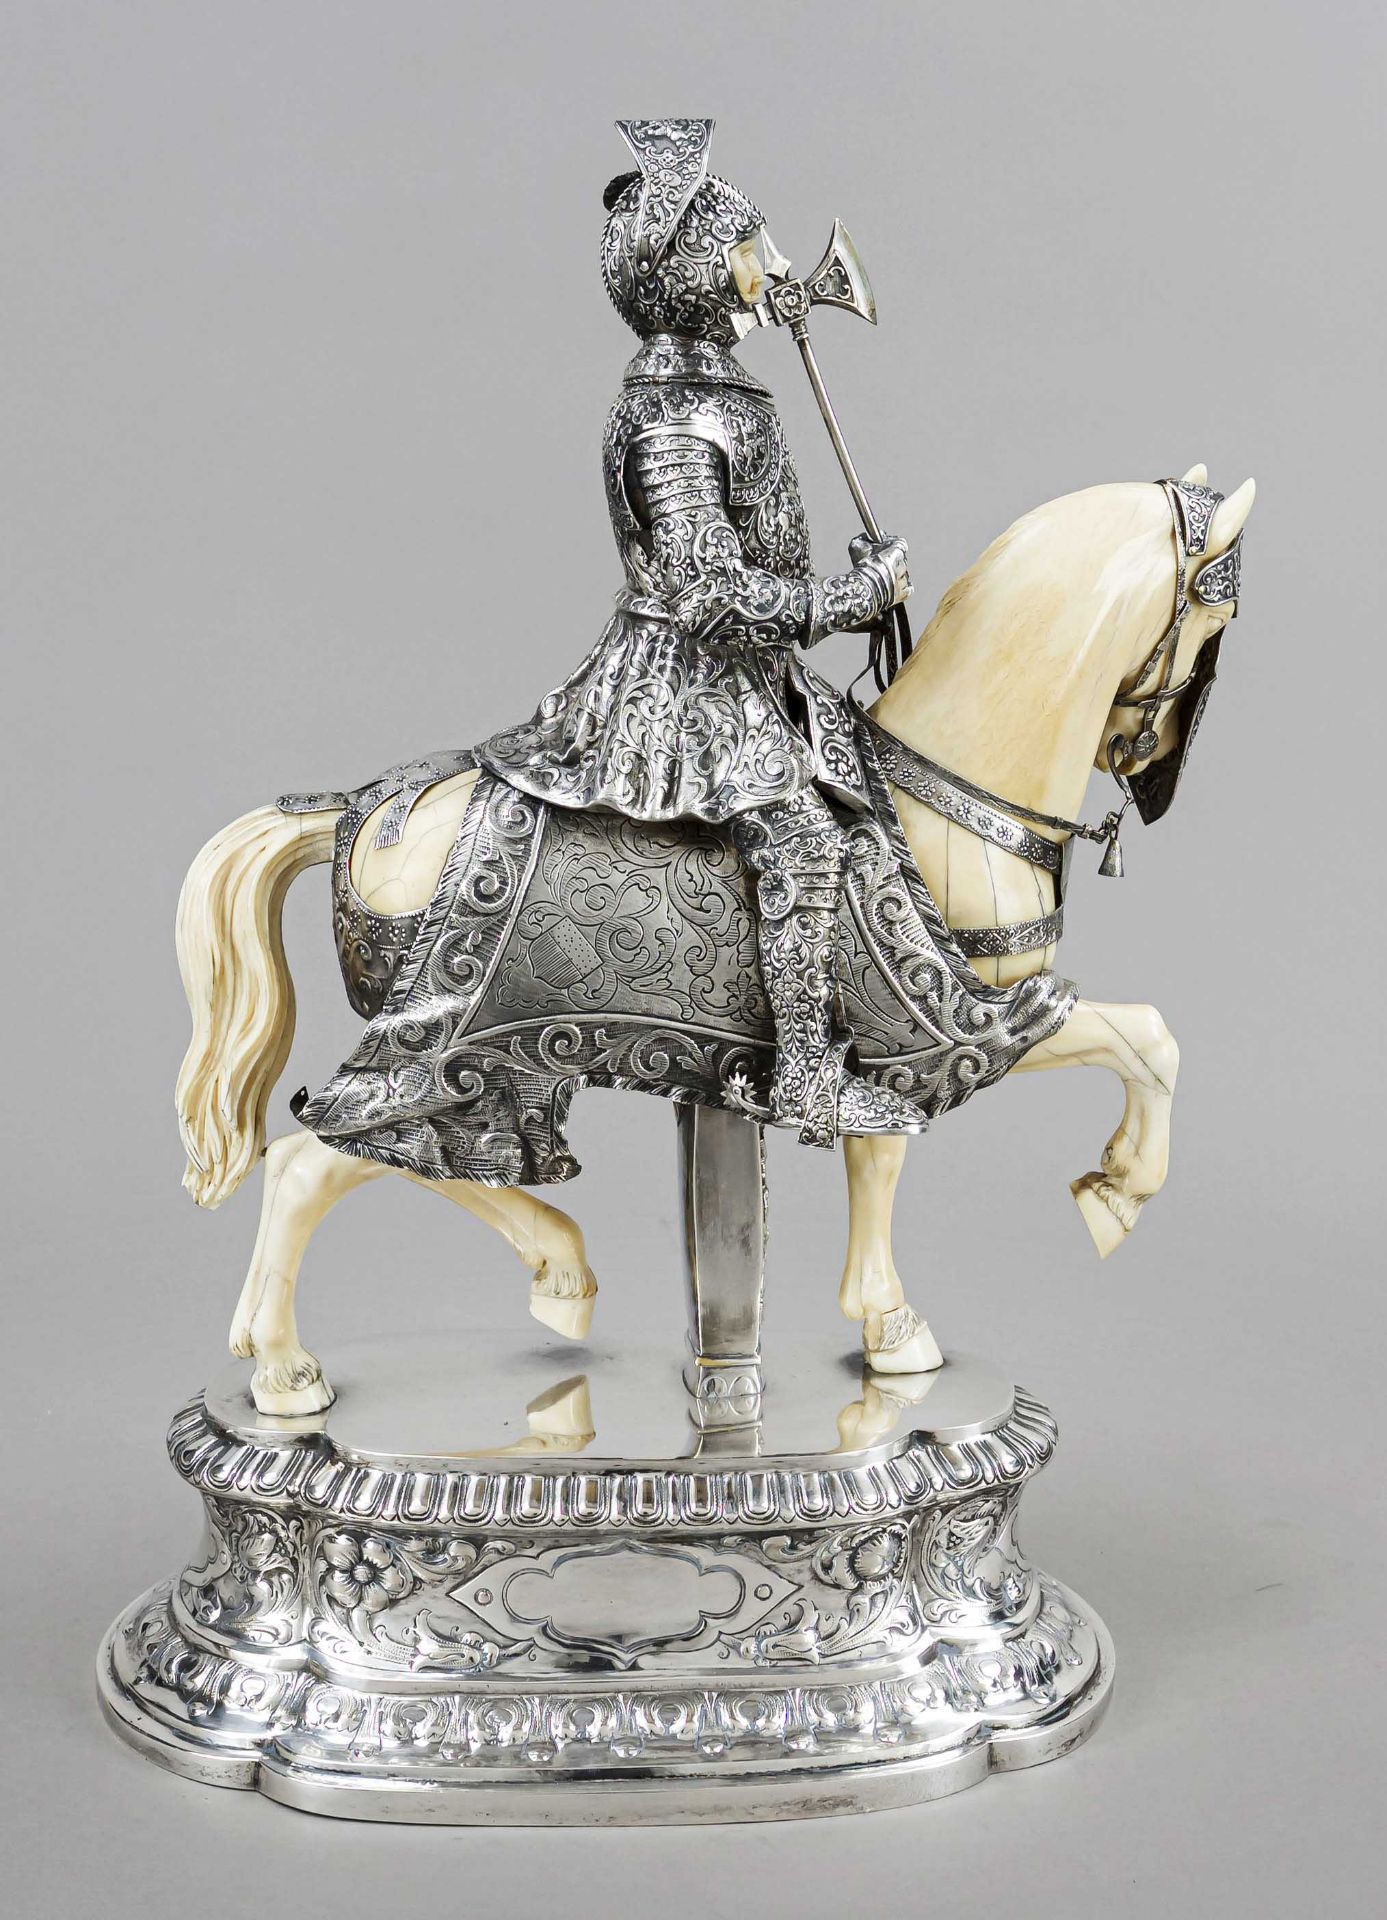 Historicism figure of a knight on horseback, German, late 19th century, probably Hanau, silver 800/ - Image 2 of 3